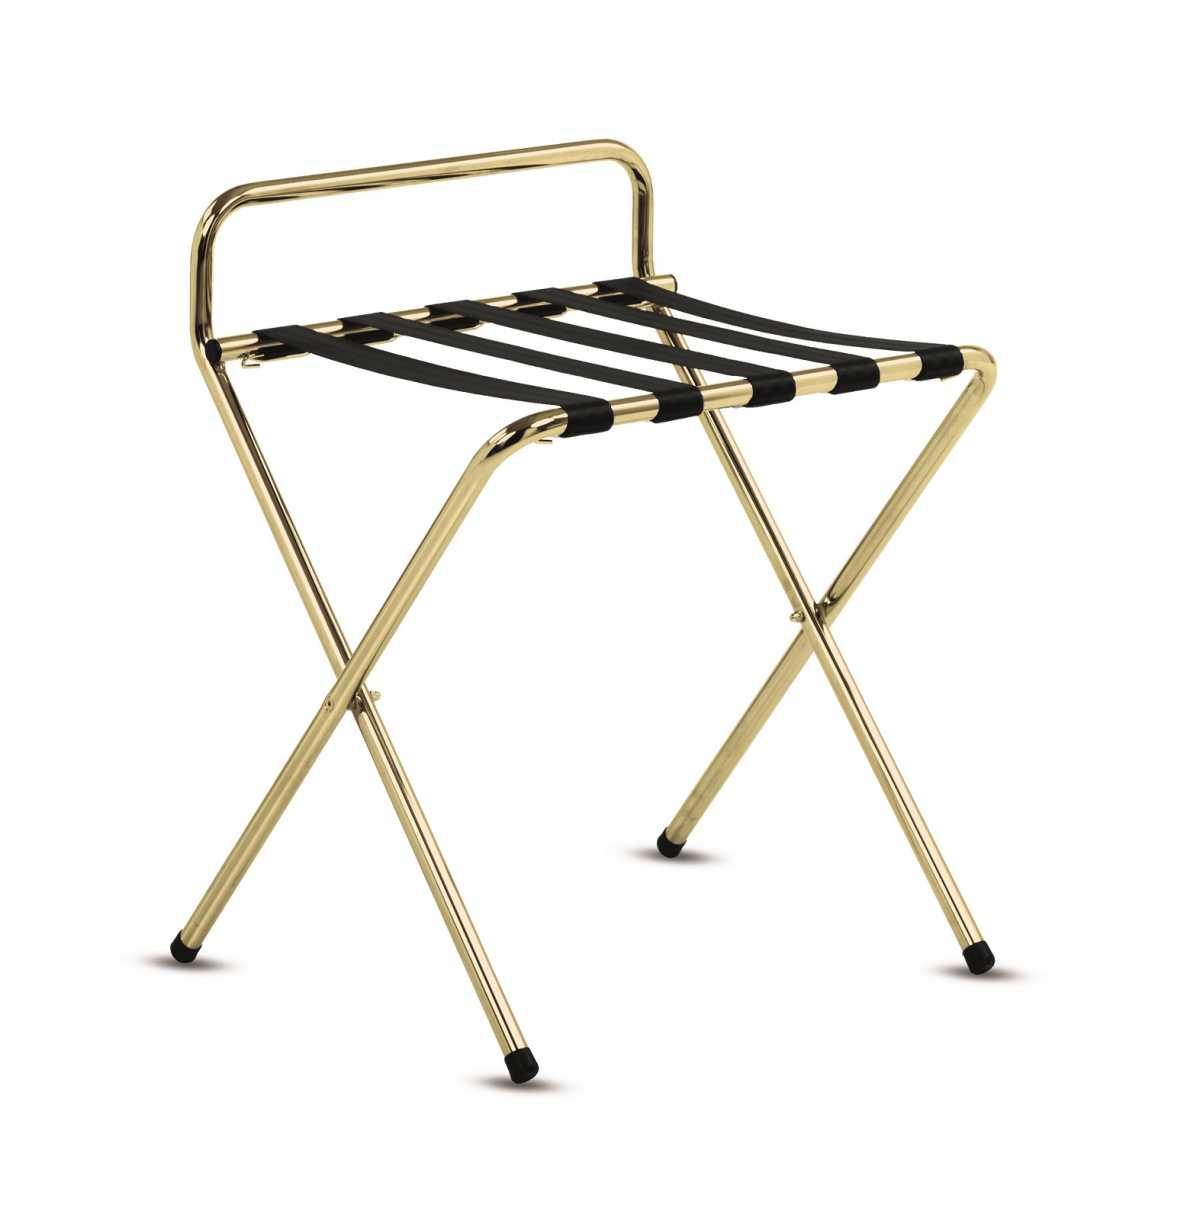 WANZL KS 600 Luggage Stand, Flash Gold Plated 